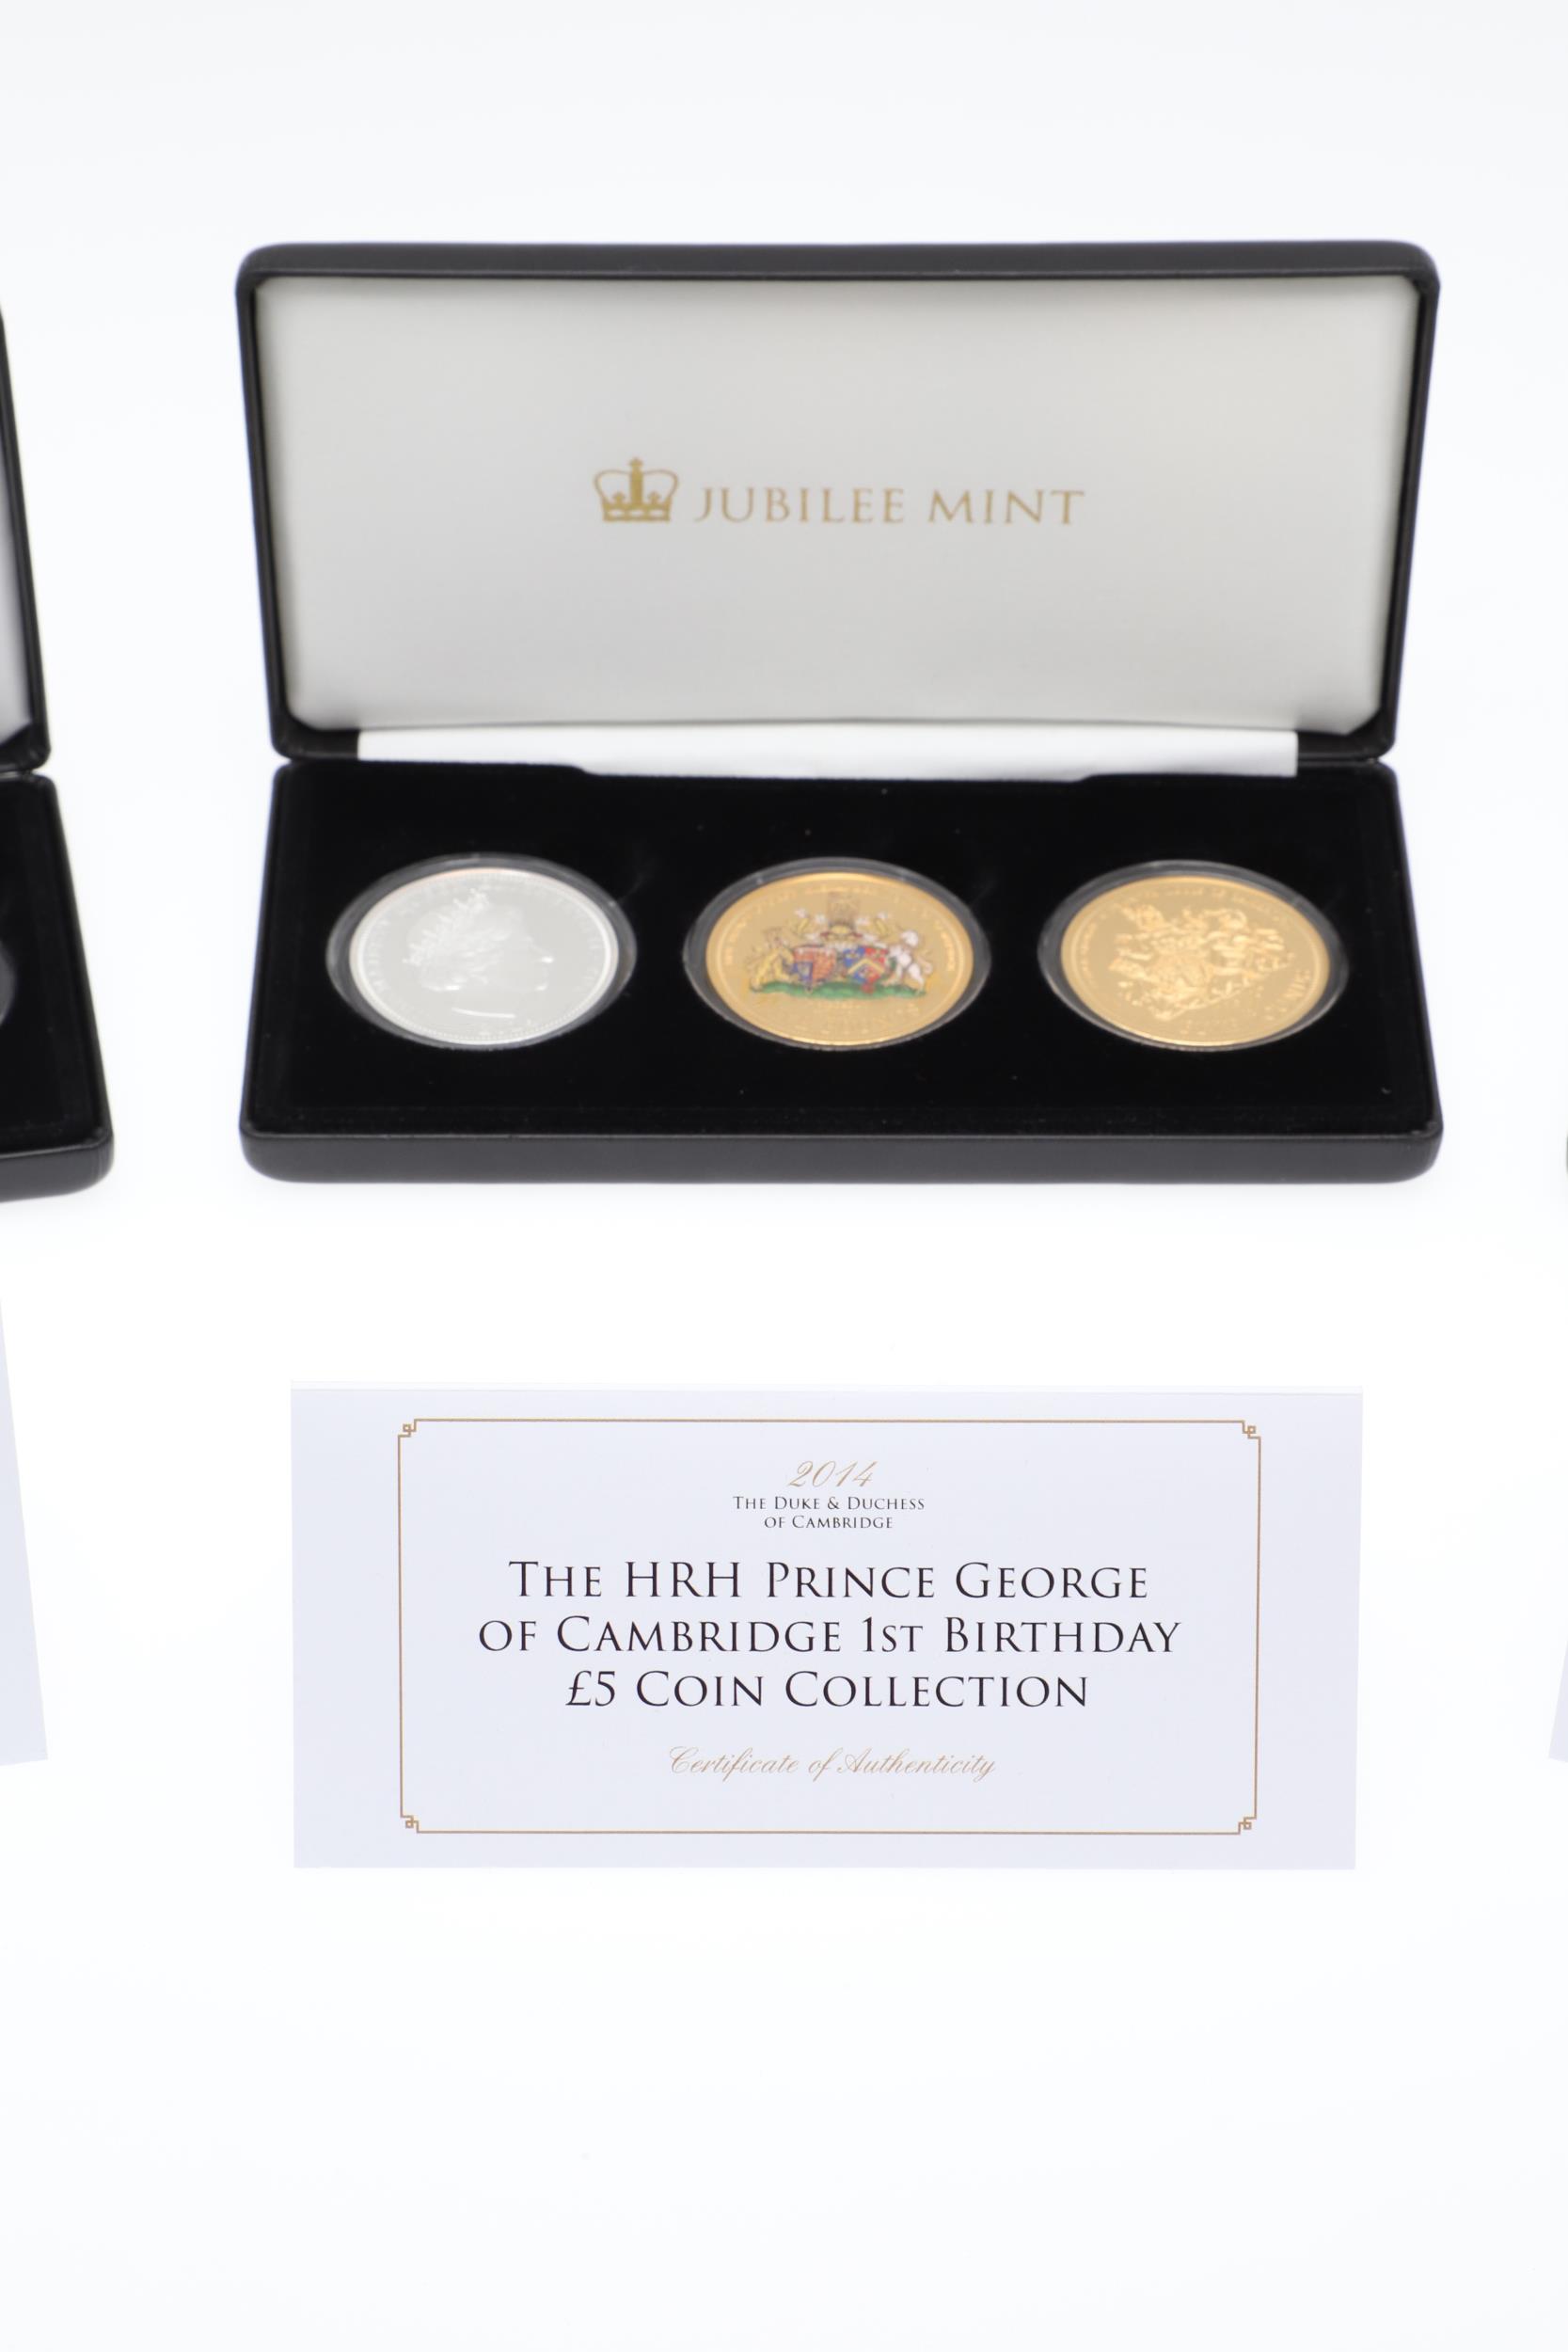 THREE JUBILEE MINT THREE COIN SILVER PROOF ROYALTY THEMED ISSUES, 2014, 2016 AND 2018. - Image 2 of 10